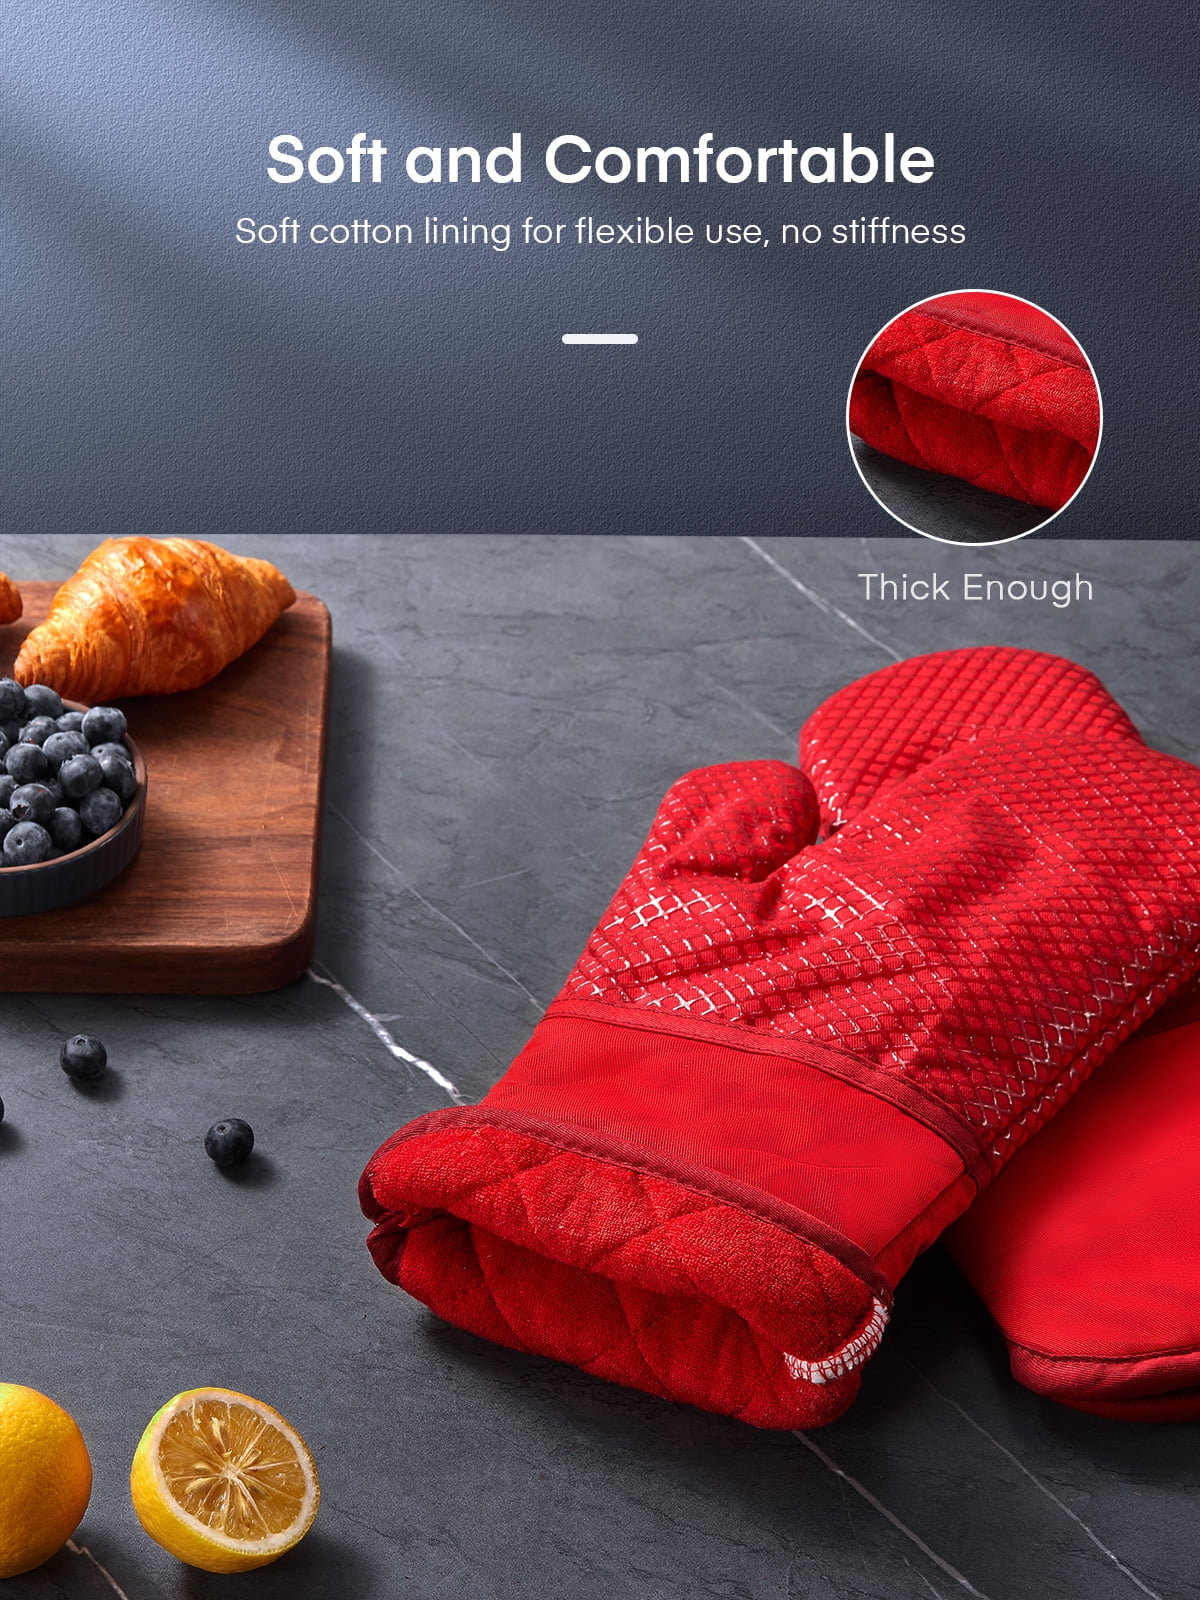 Oven Mitts, Heat Resistant Kitchen Oven Gloves 572°F, Non-Slip Silicone  Surface, Extra Long Flexible Thick Mitts for Kitchen , Cooking , Baking ,  BBQ